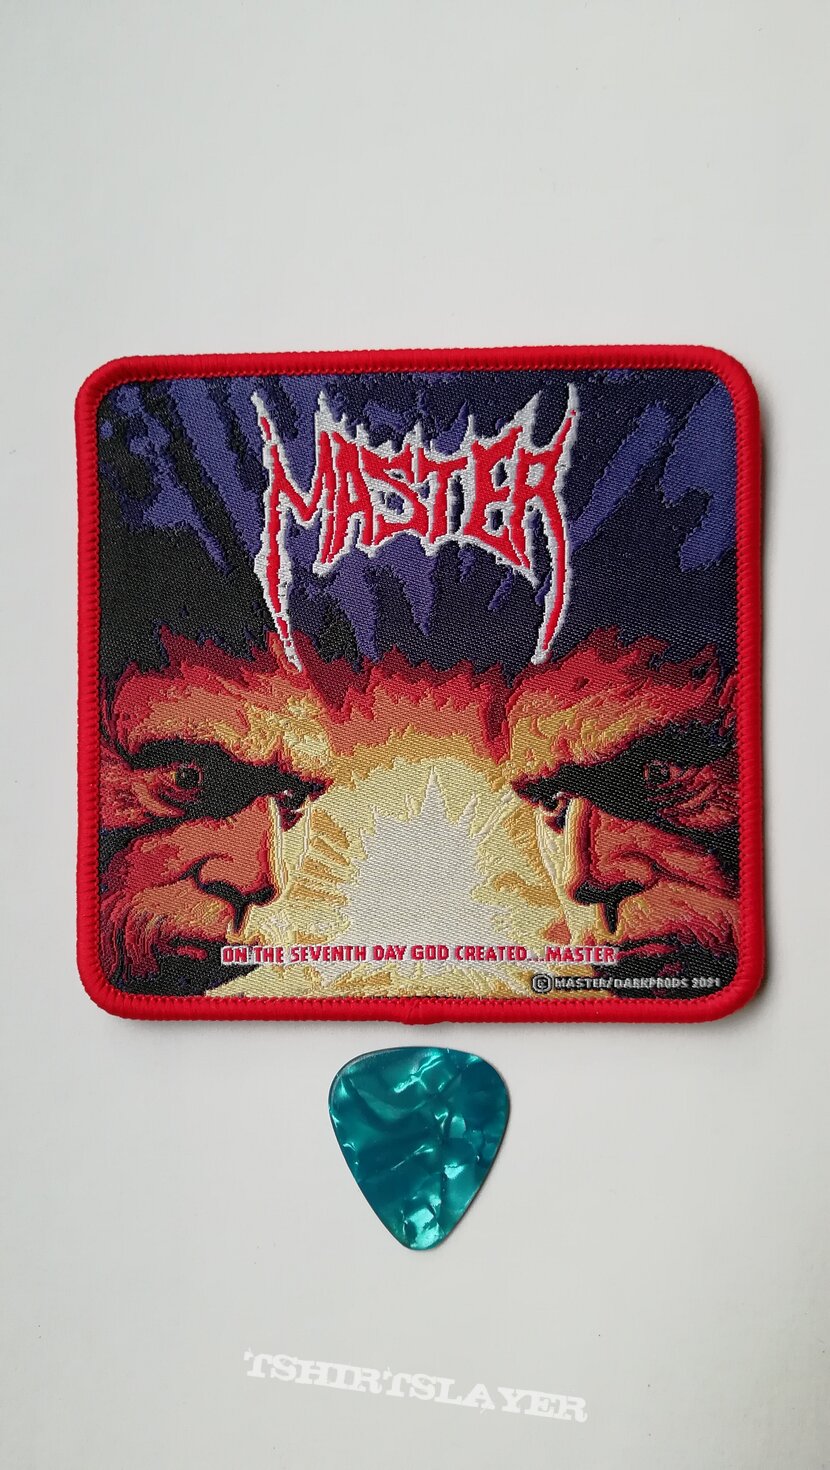 Master - On The Seventh Day God Created... Master - Patch 